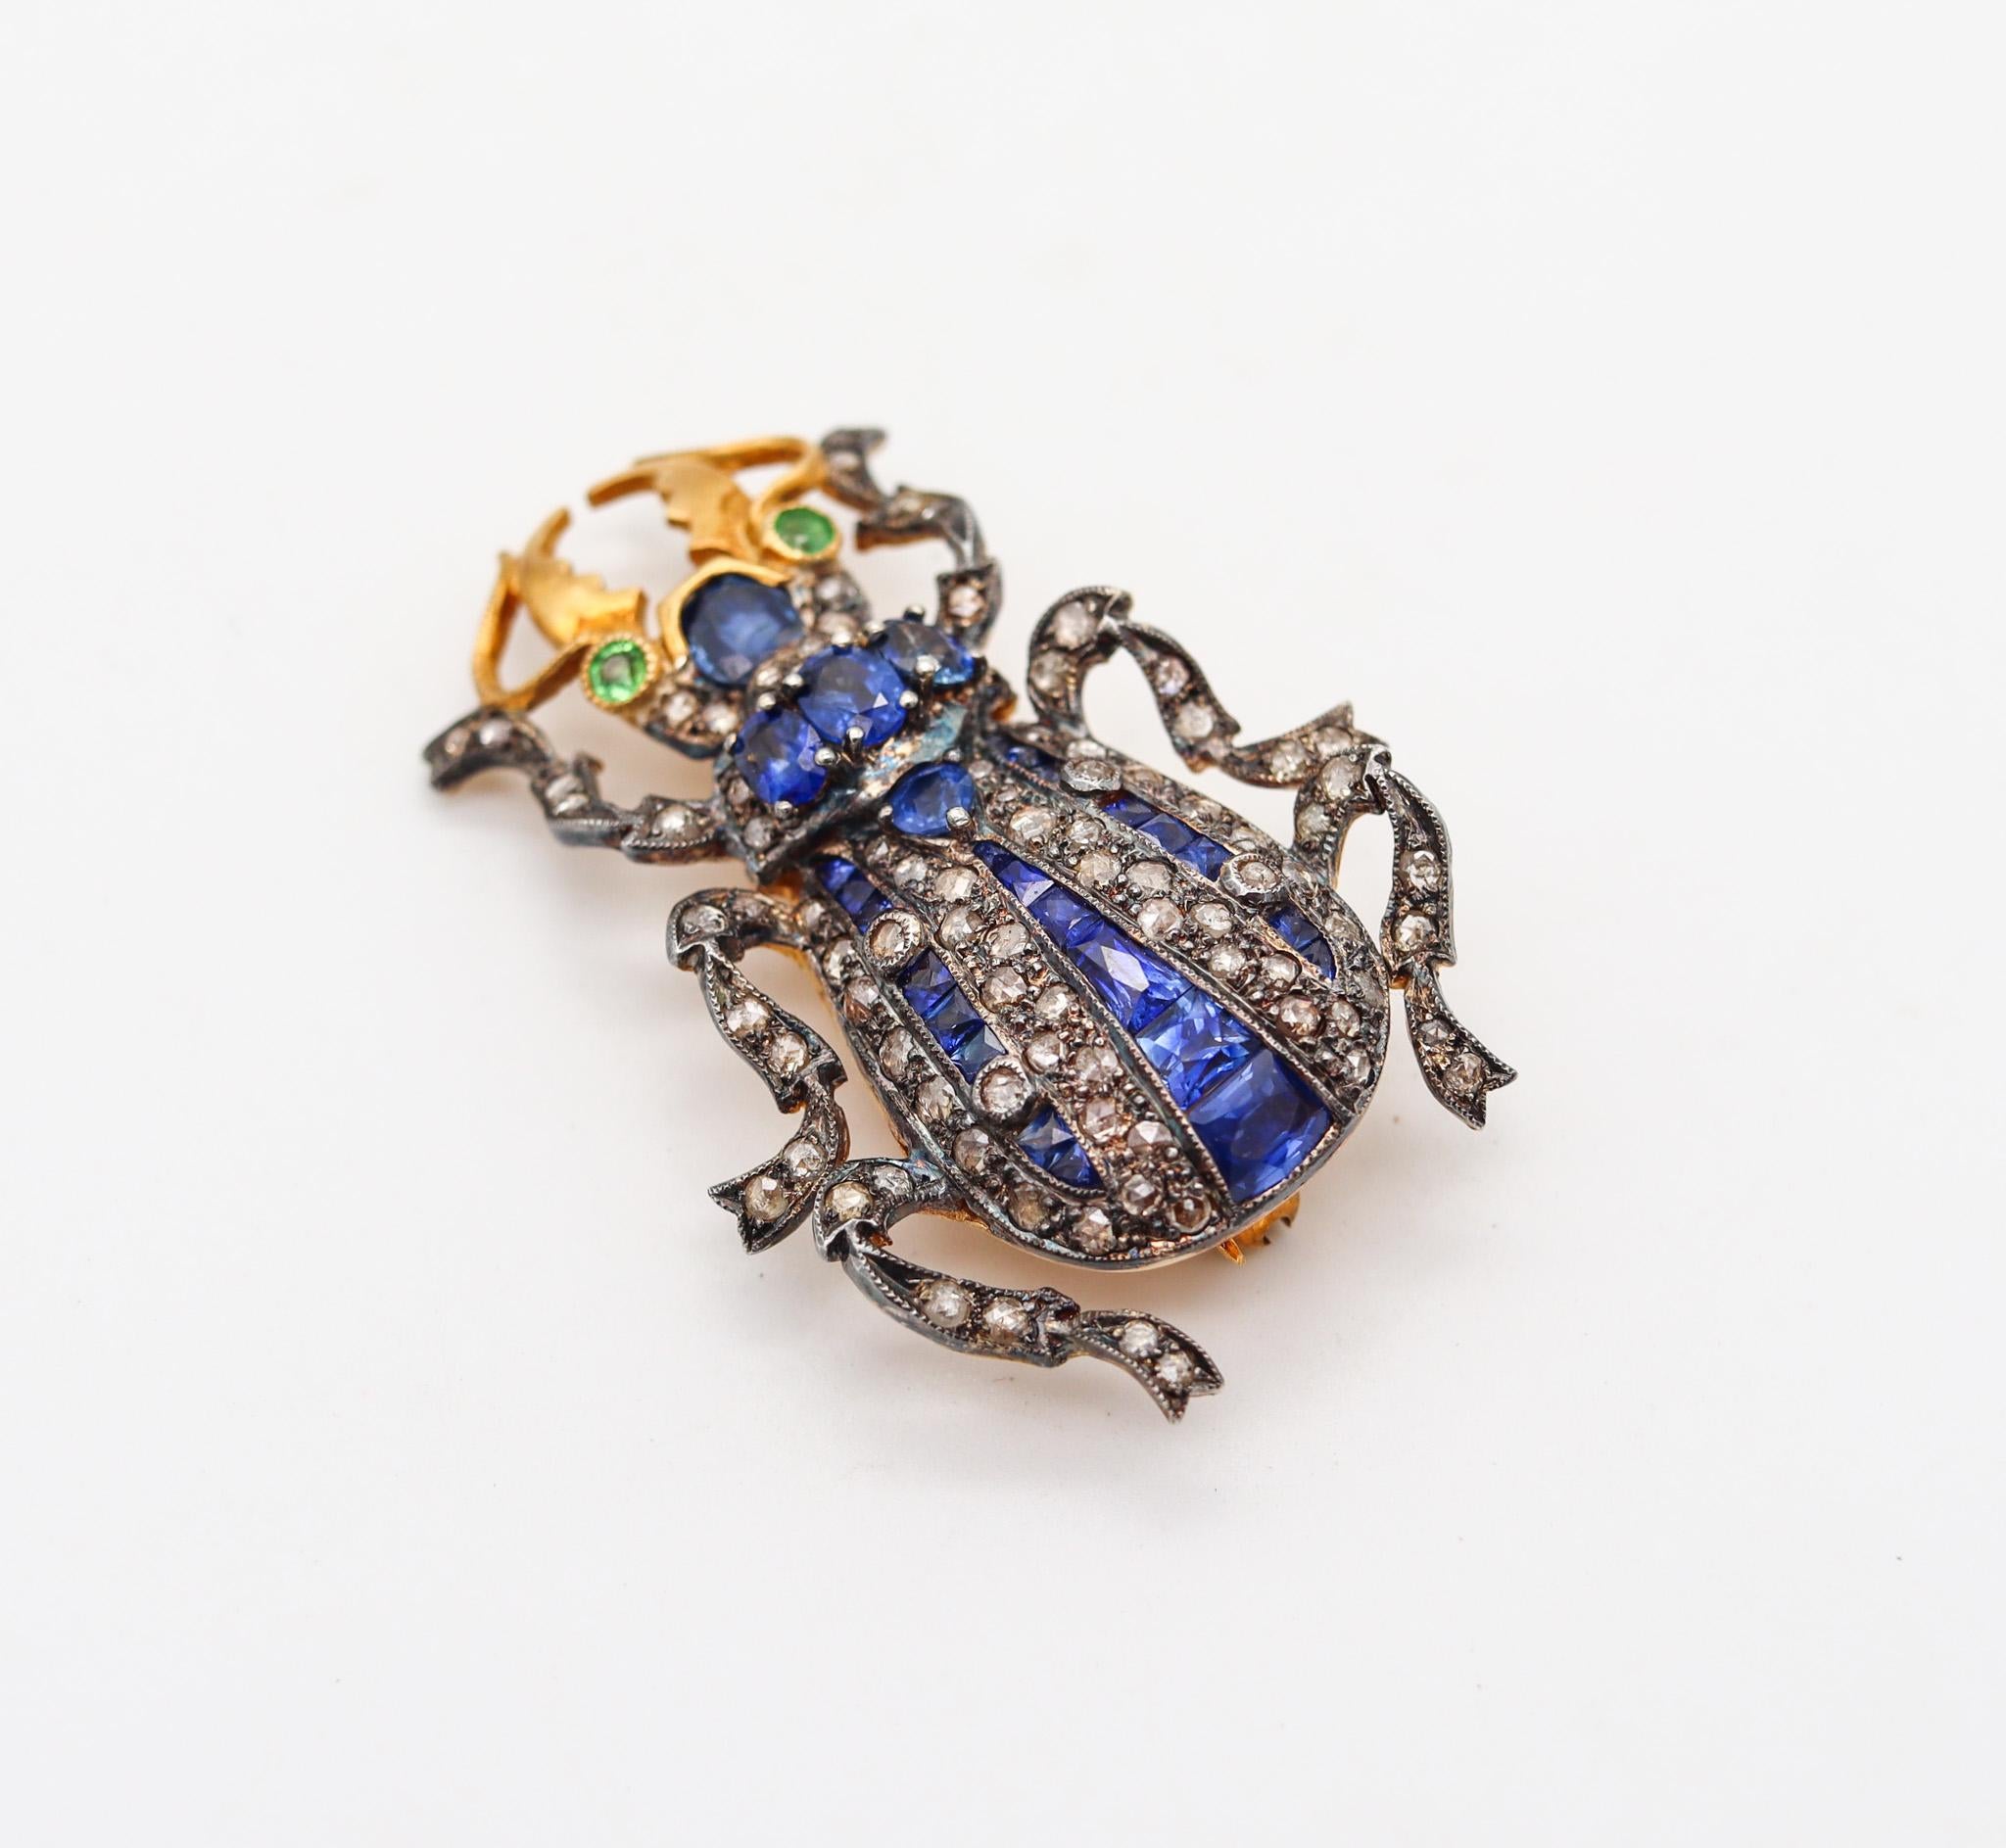 French Cut Edwardian-Art Nouveau 1900 Scarab Brooch Silver And 7.29 Ctw Sapphires & Diamond